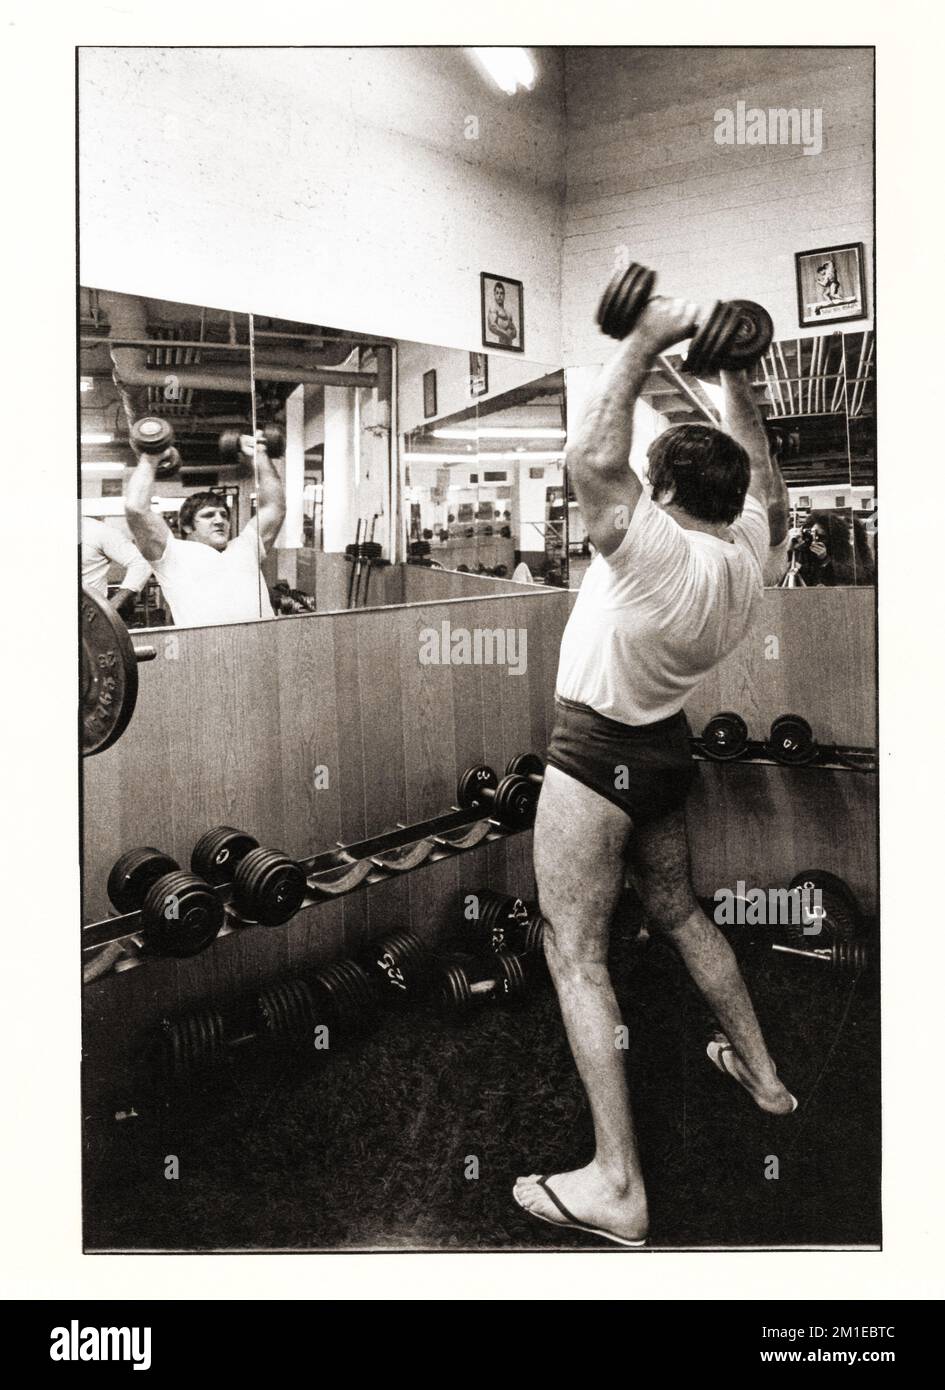 Wrestling legend Bruno Sammartino works out with heavy weights at the Mid City Health Club in Midtown, Manhattan, New York City, 1975 Stock Photo